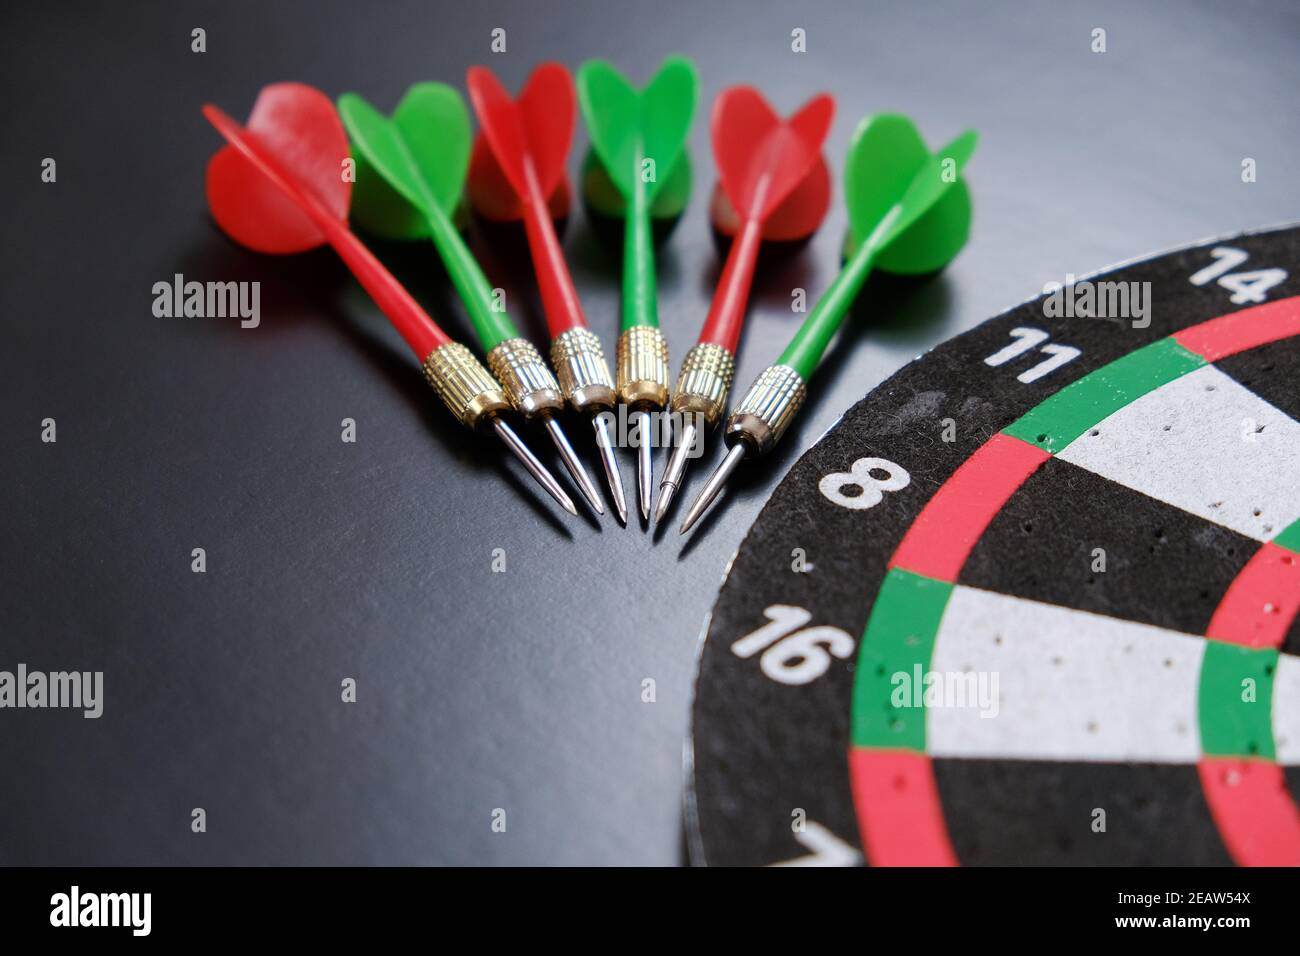 dartboard and red, green and yellow darts on a black background Stock Photo